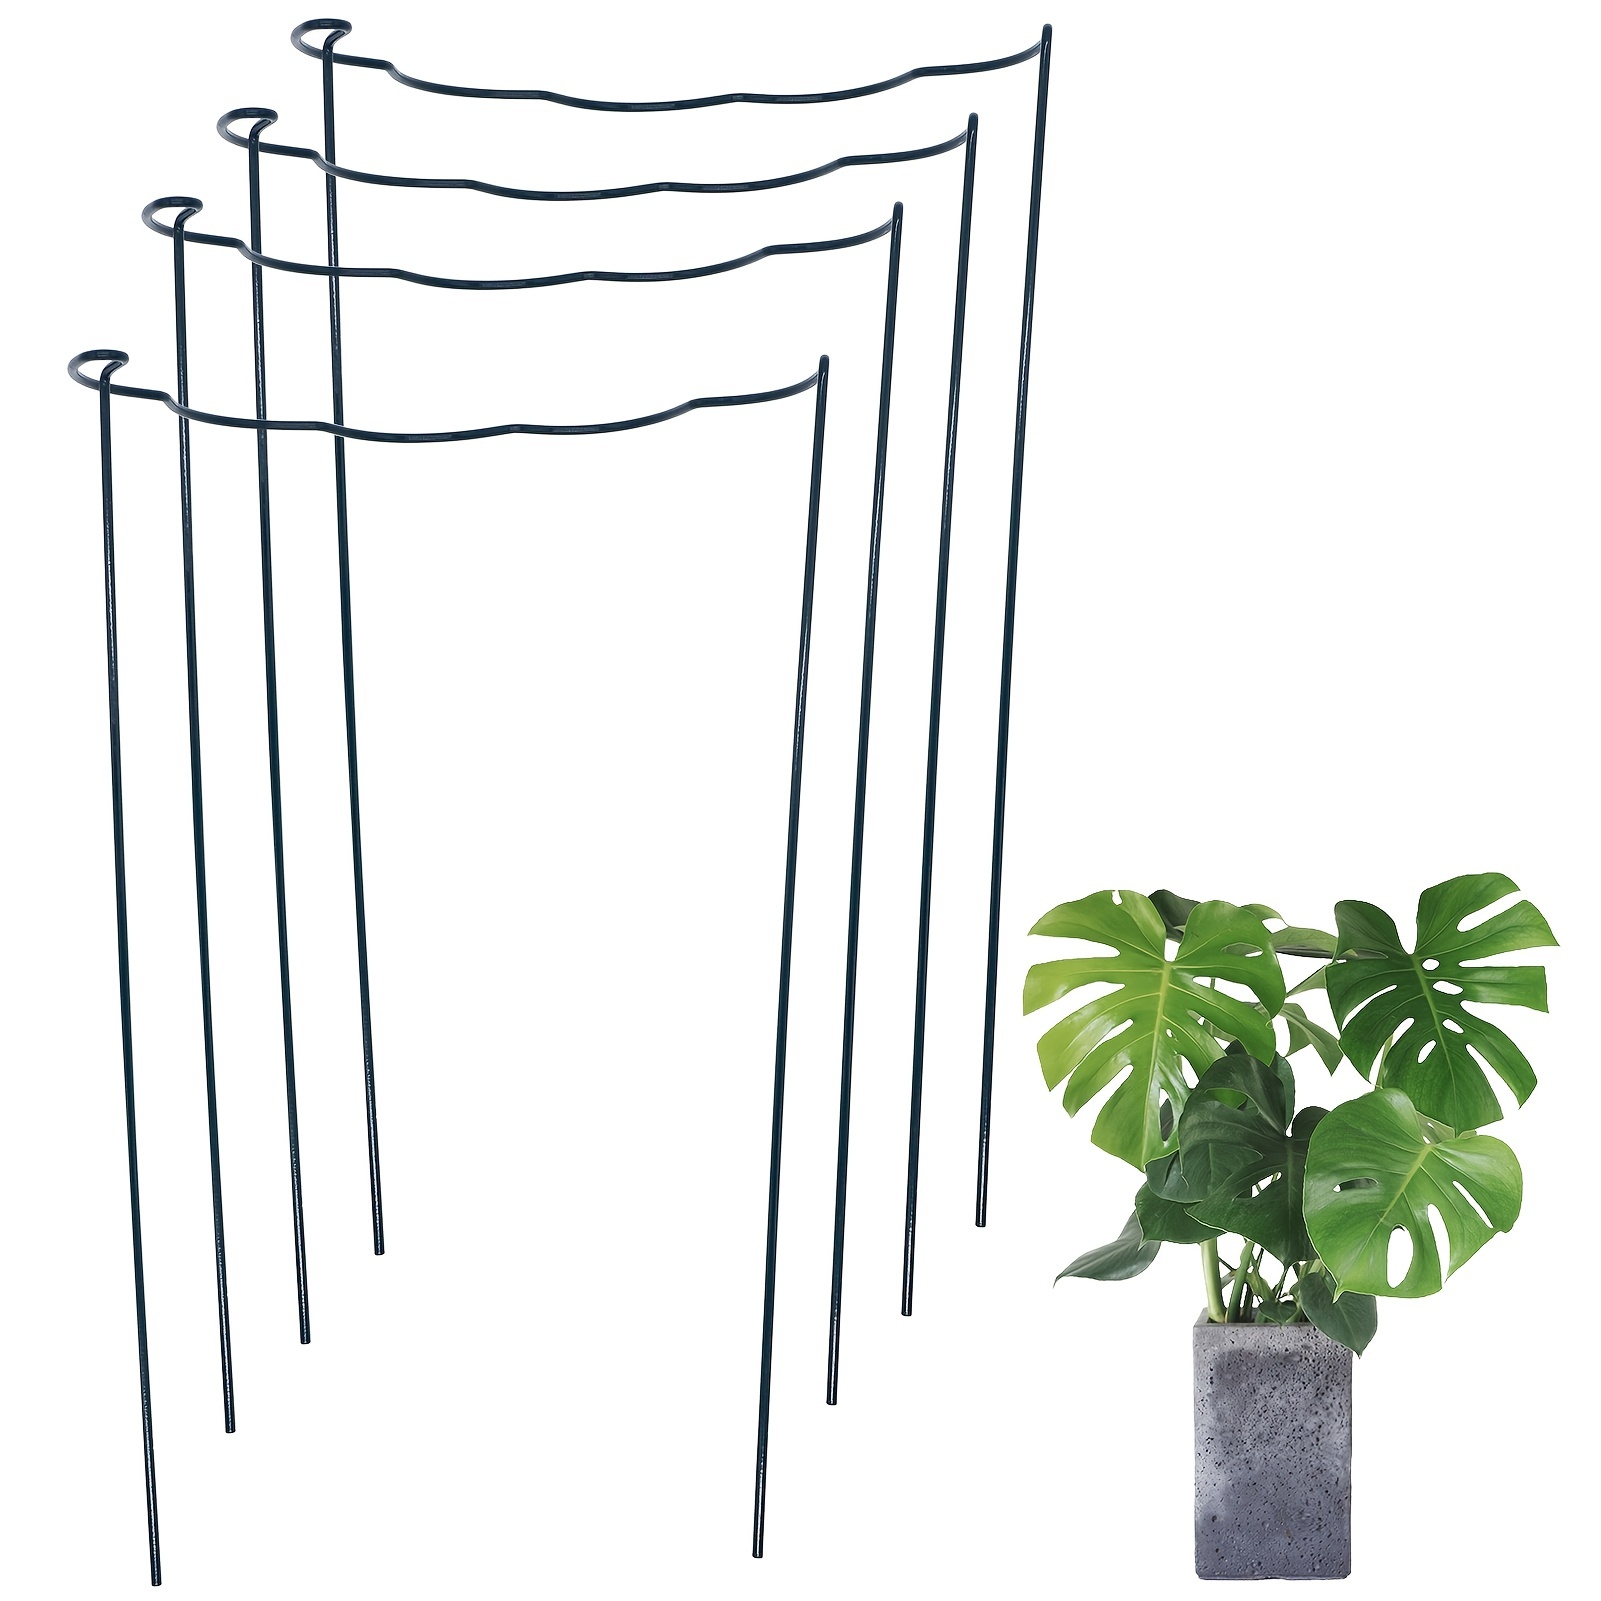 

4 Packs, Plant Support Stakes, Semi-wavy Metal Garden Plant Support, Outdoor Plant Support Ring Cage, Plant Support Stakes For Tomatoes, Roses, Vines, Indoor Plants, 7.8 "x13.7", 9.8 "x15.7